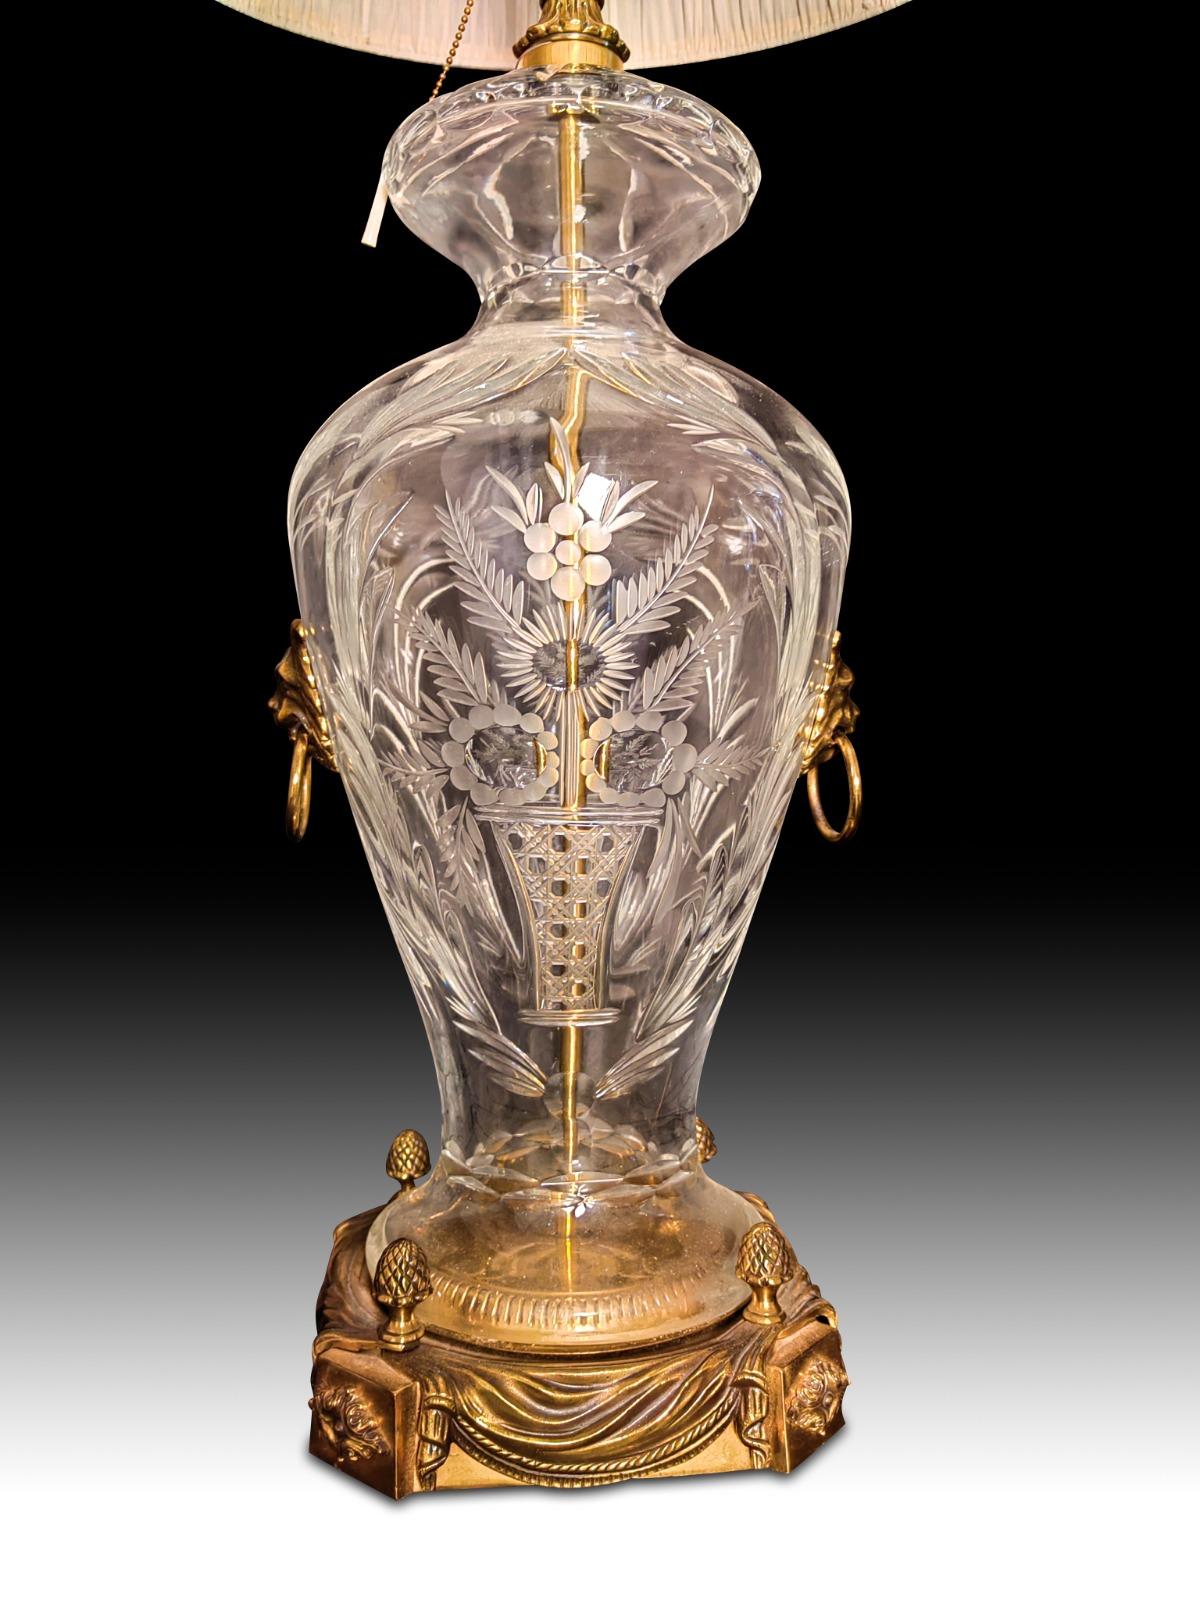 Hand-Crafted Cut Glass Lamp, 20th Century